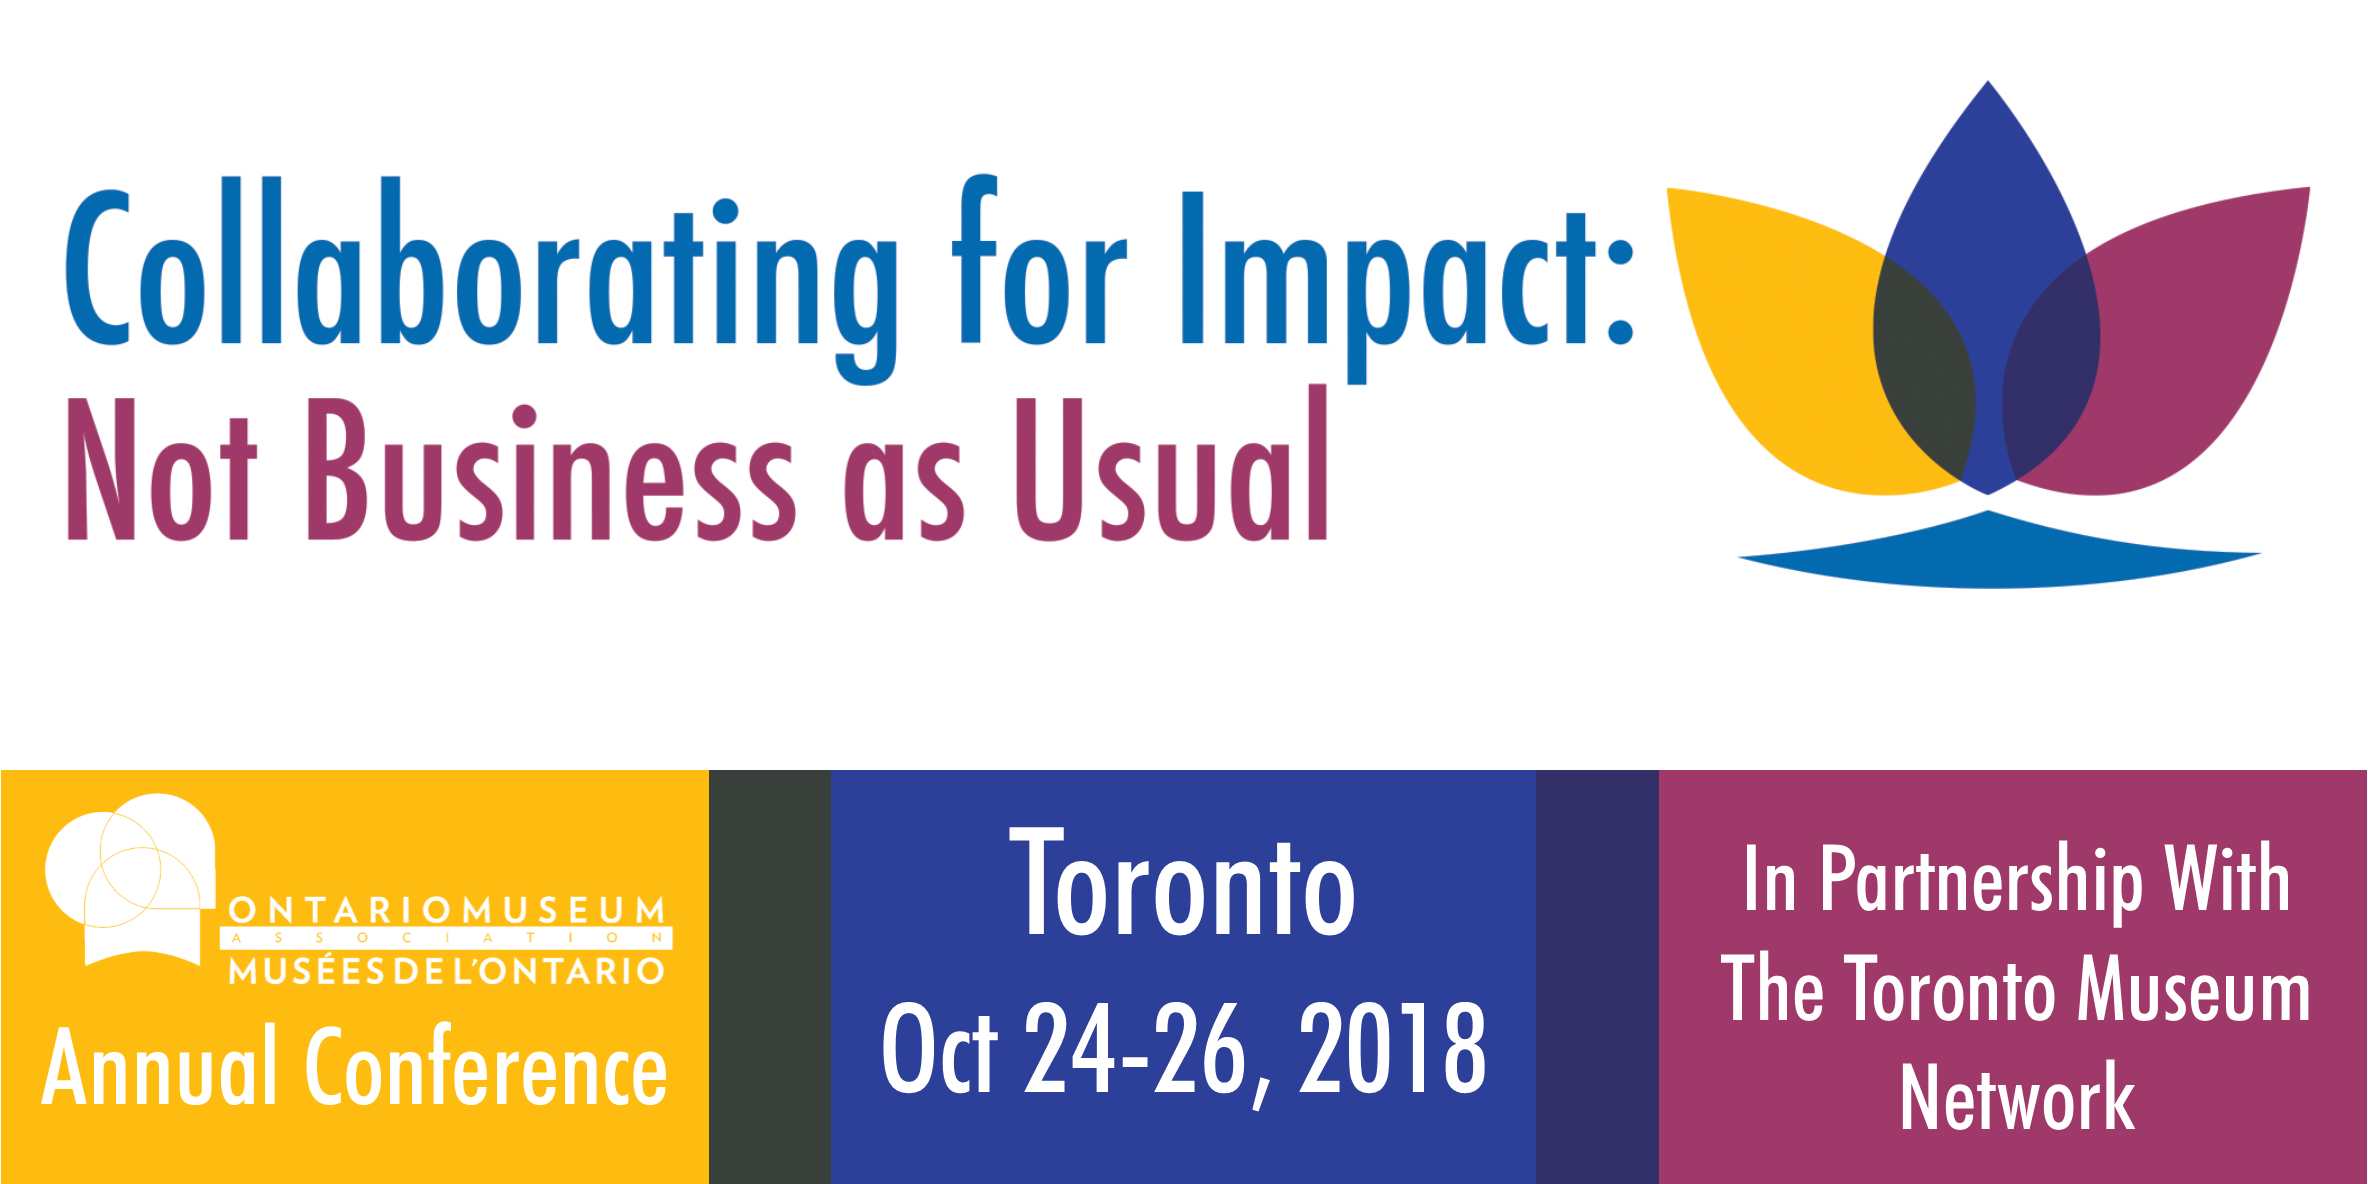 OMA Annual Conference 2018, Collaborating for Impact: Not Business as Usual. Toronto, October 24-26. In partnership with the Toronto Museum Network.